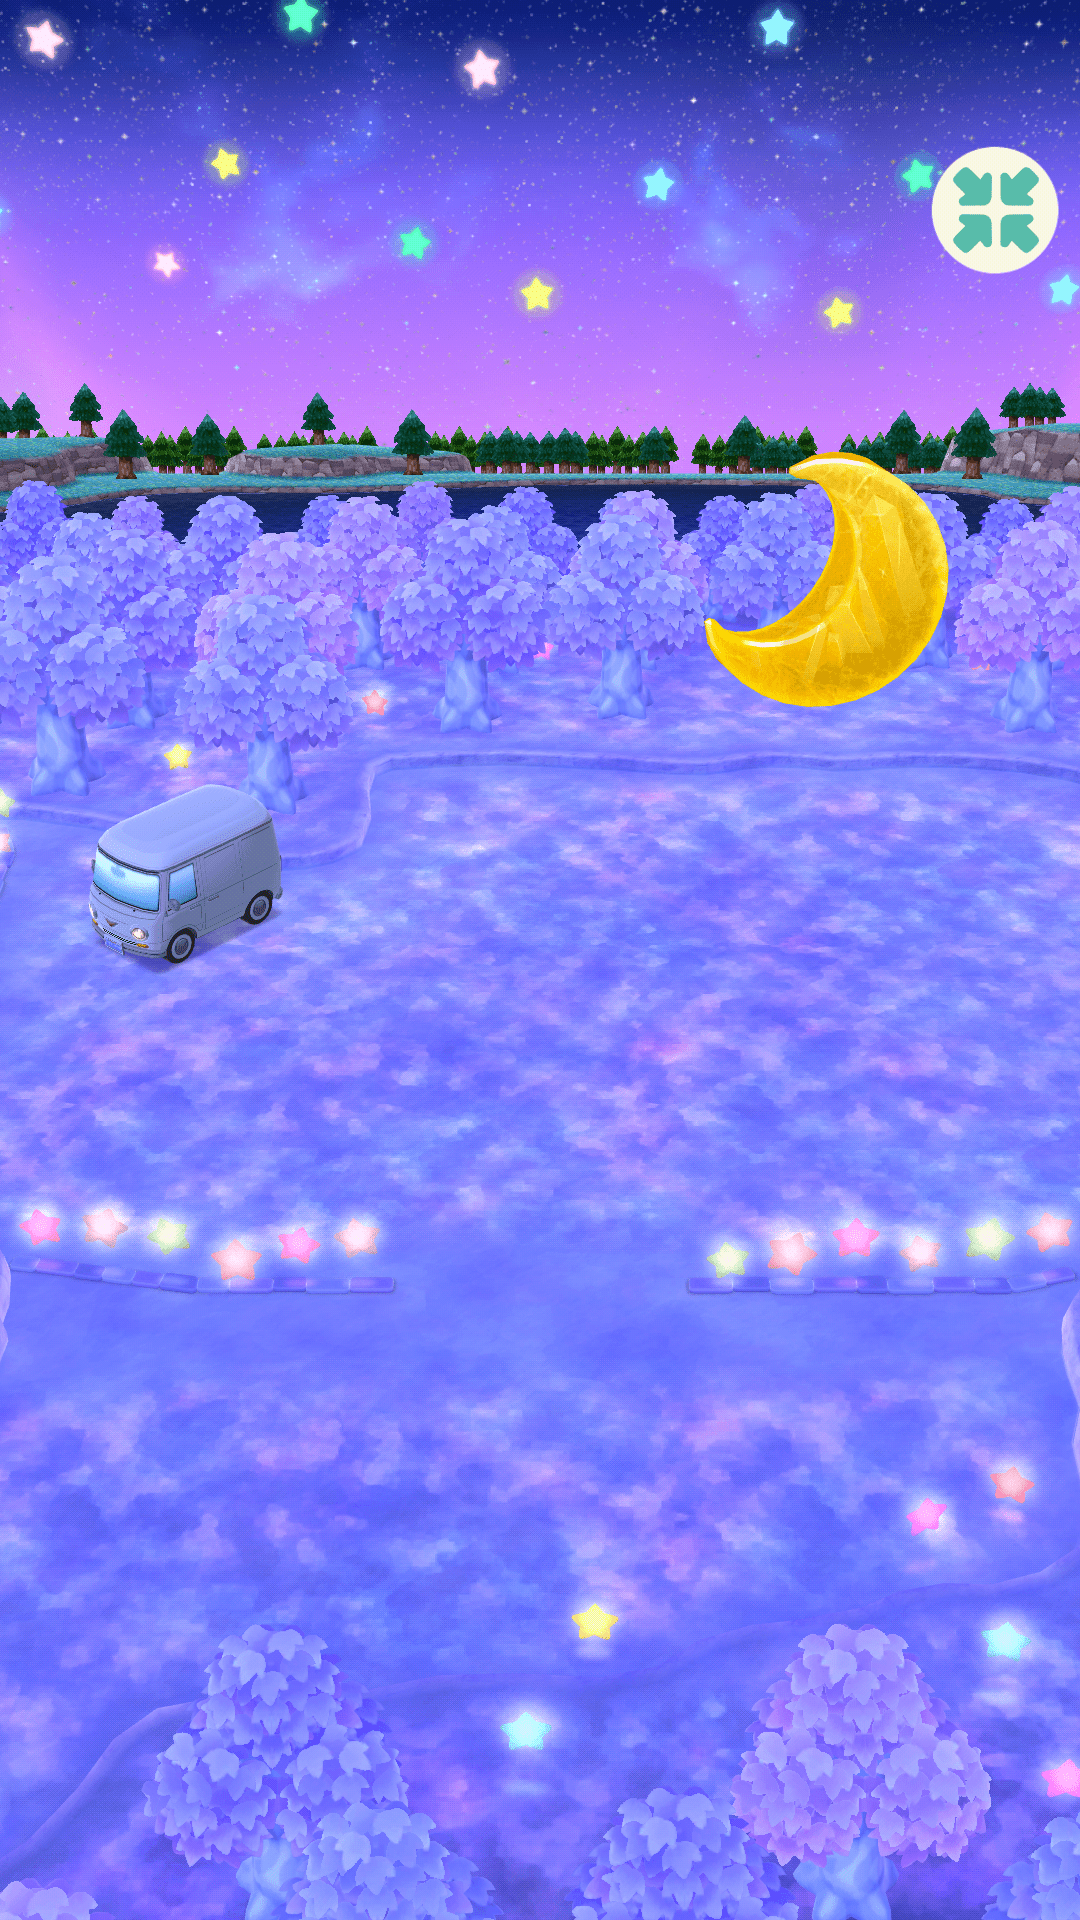 A van is driving through a purple field with a half moon and stars in the sky. - Animal Crossing